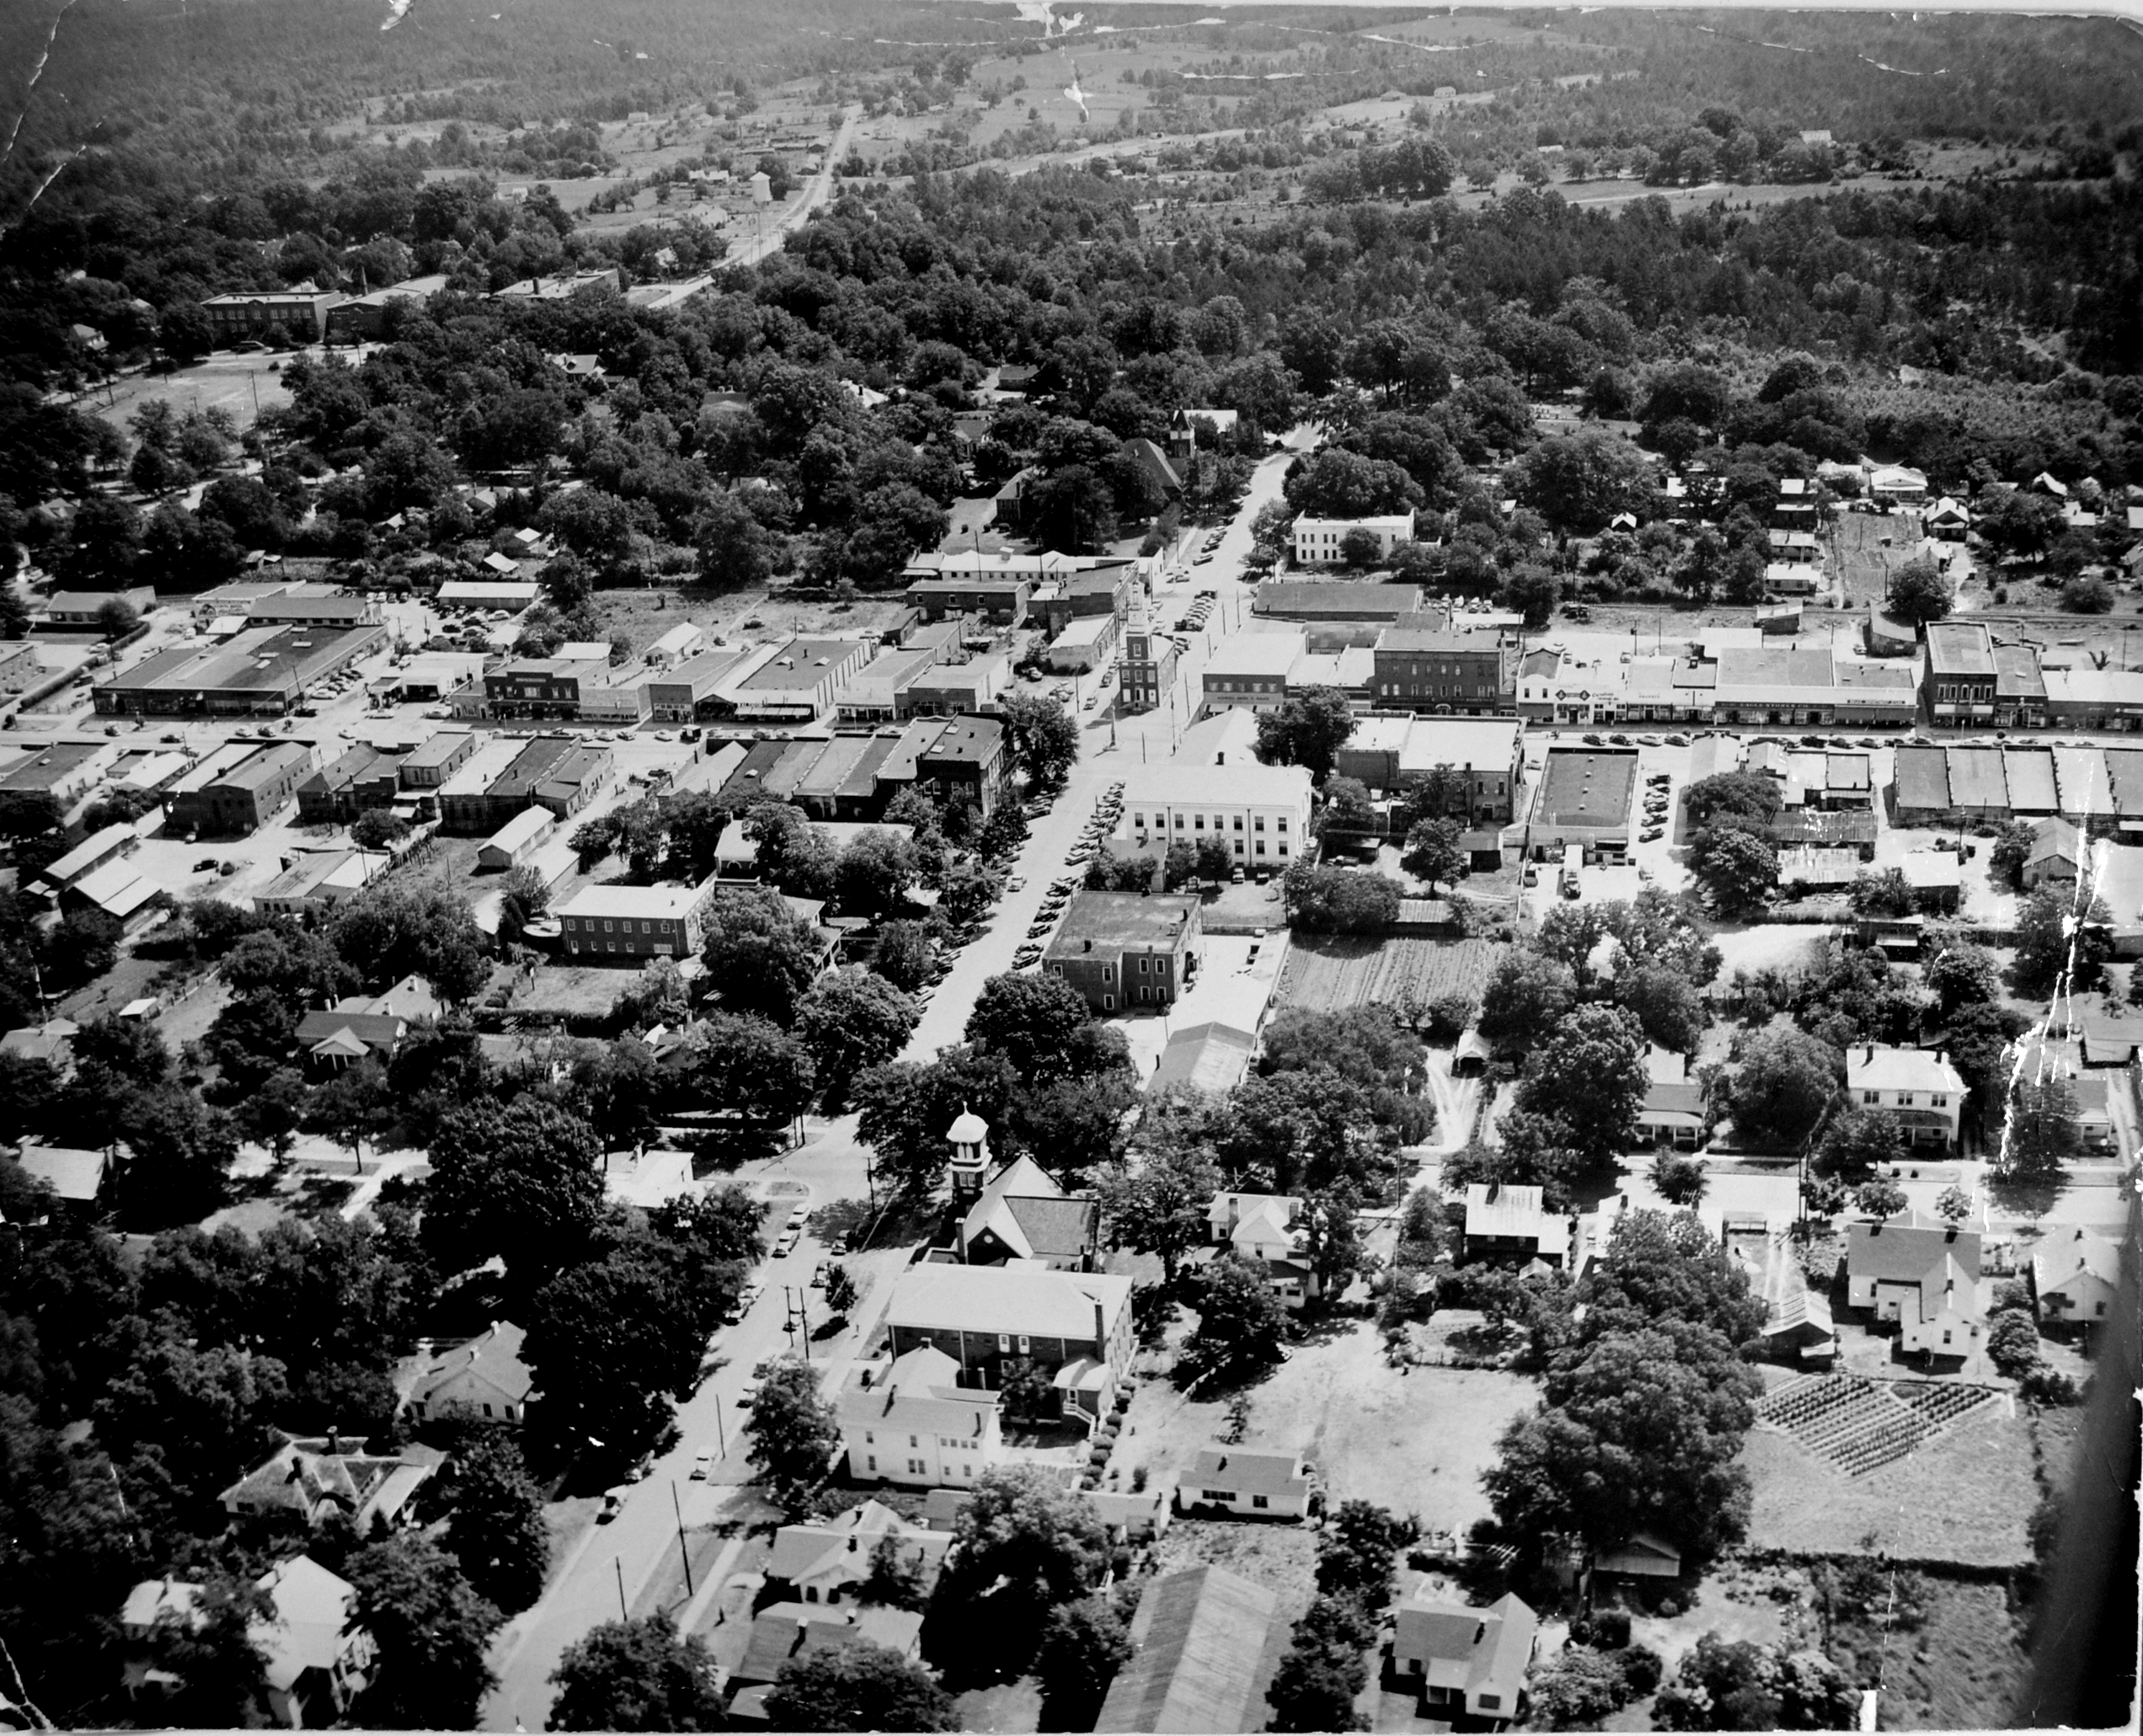 Aerial image of old Winnsoboro, S.C. - Courtesy of the AFLLC